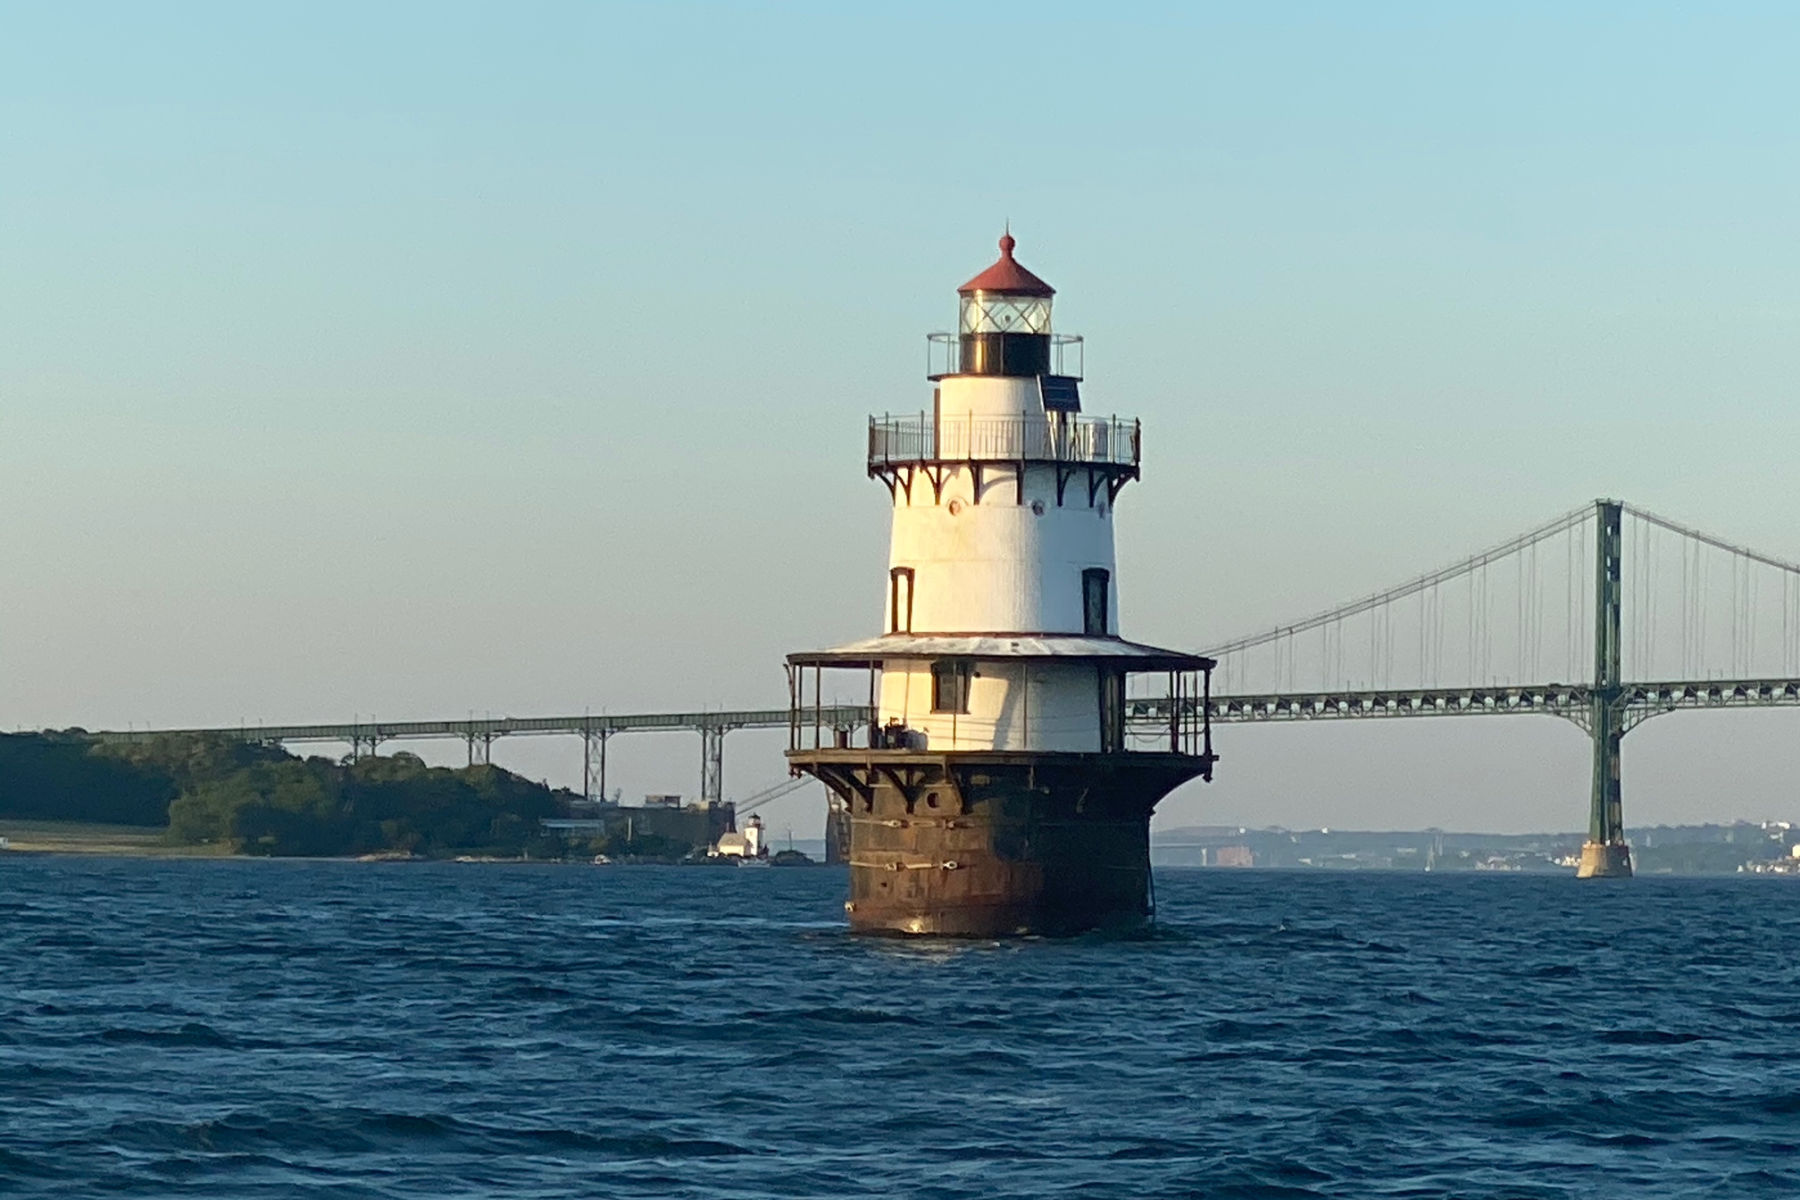 Hog Island Light from the water